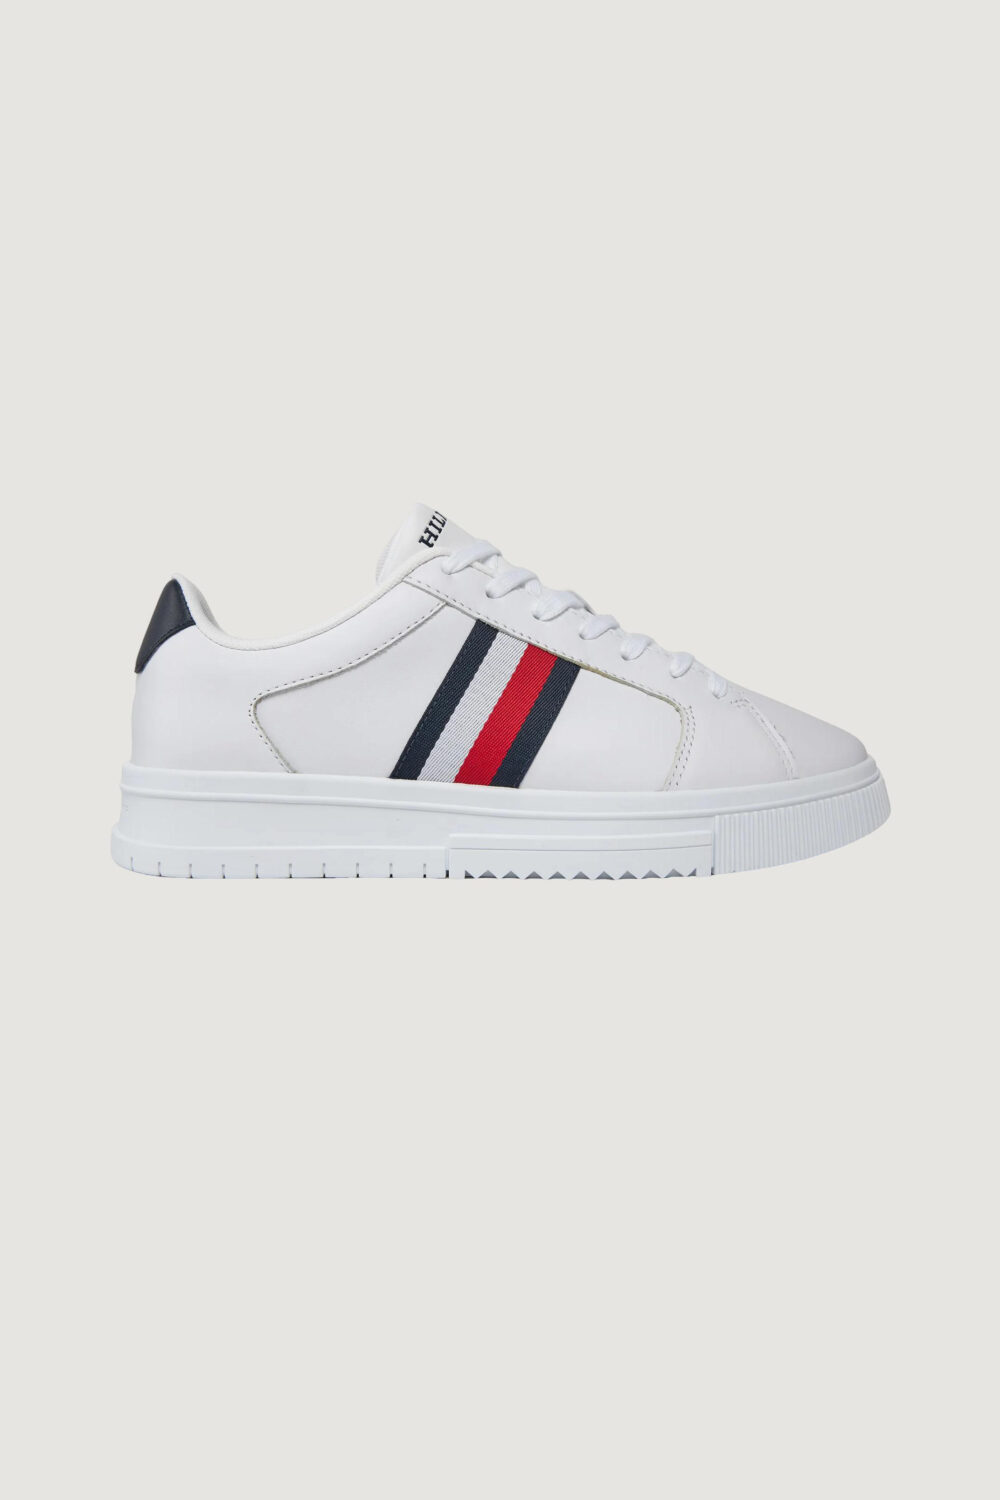 Sneakers Tommy Hilfiger SUPERCUP LTH STRIPES Bianco - Foto 1